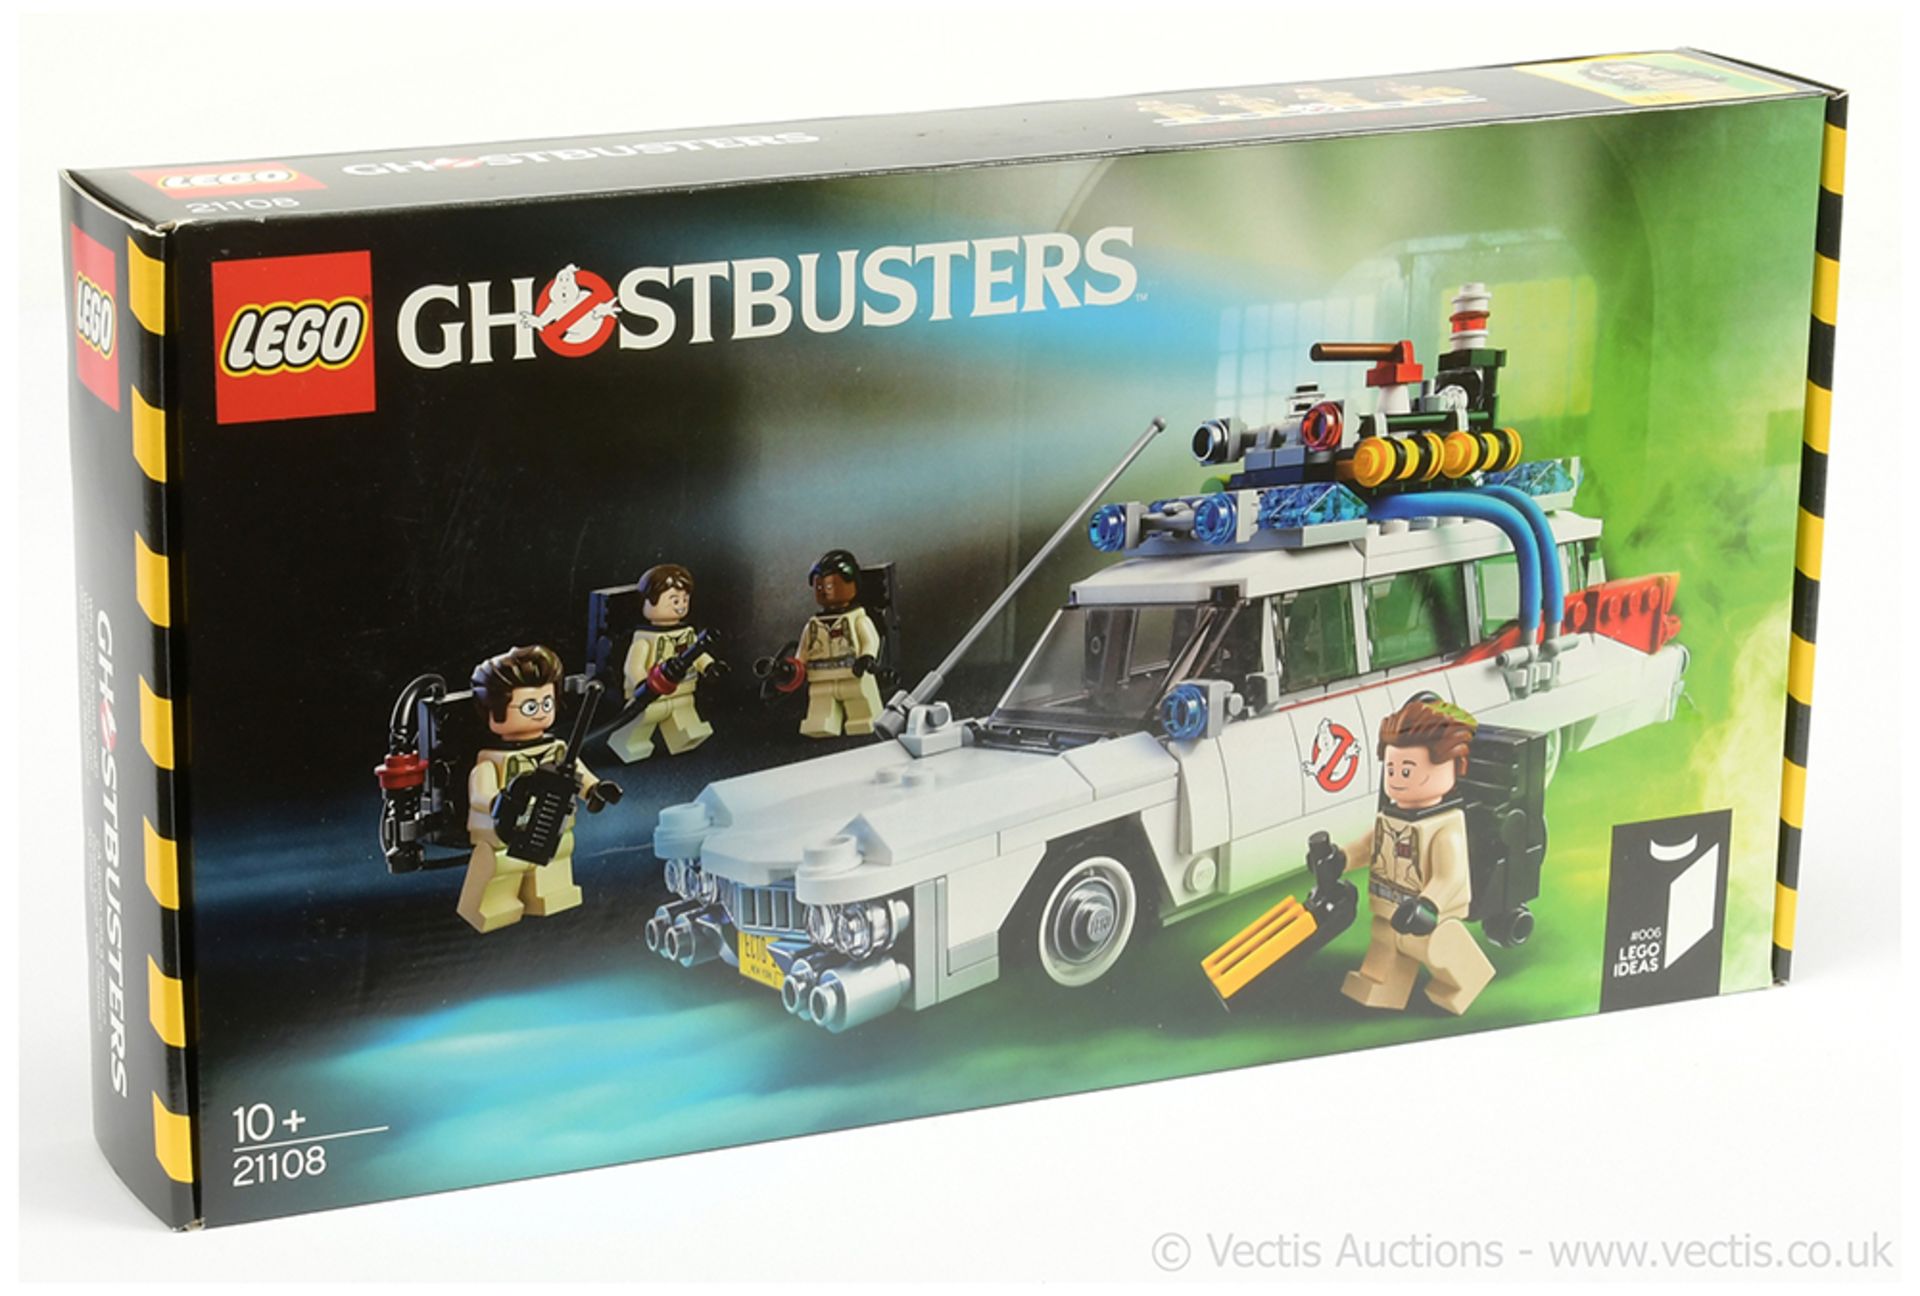 Lego Ghostbusters set number 21108 Ecto-1